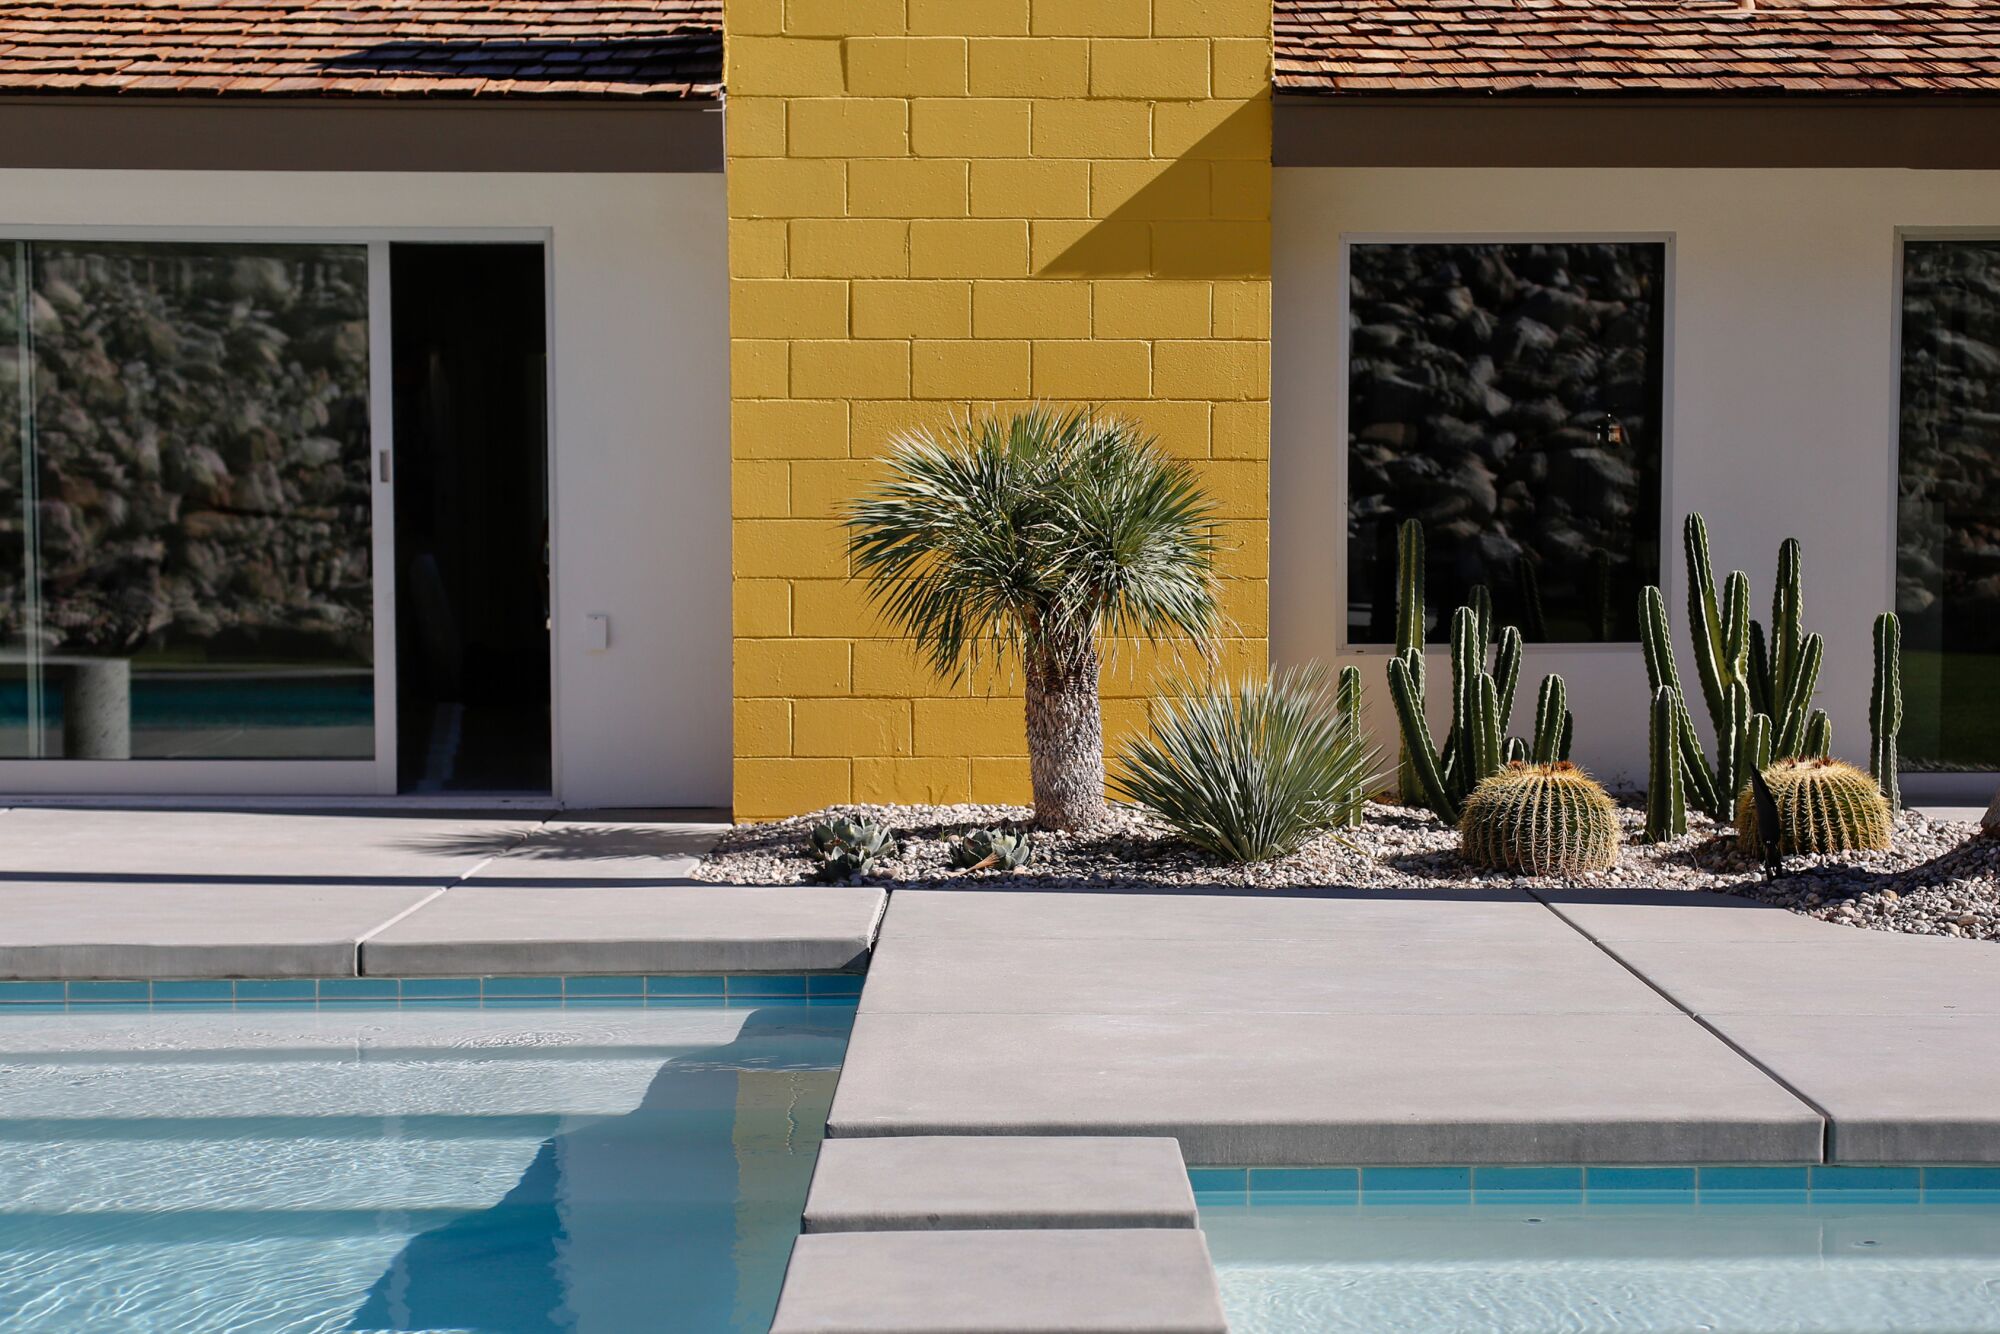 A swimming pool and cactus in the yard of a house with a yellow fireplace